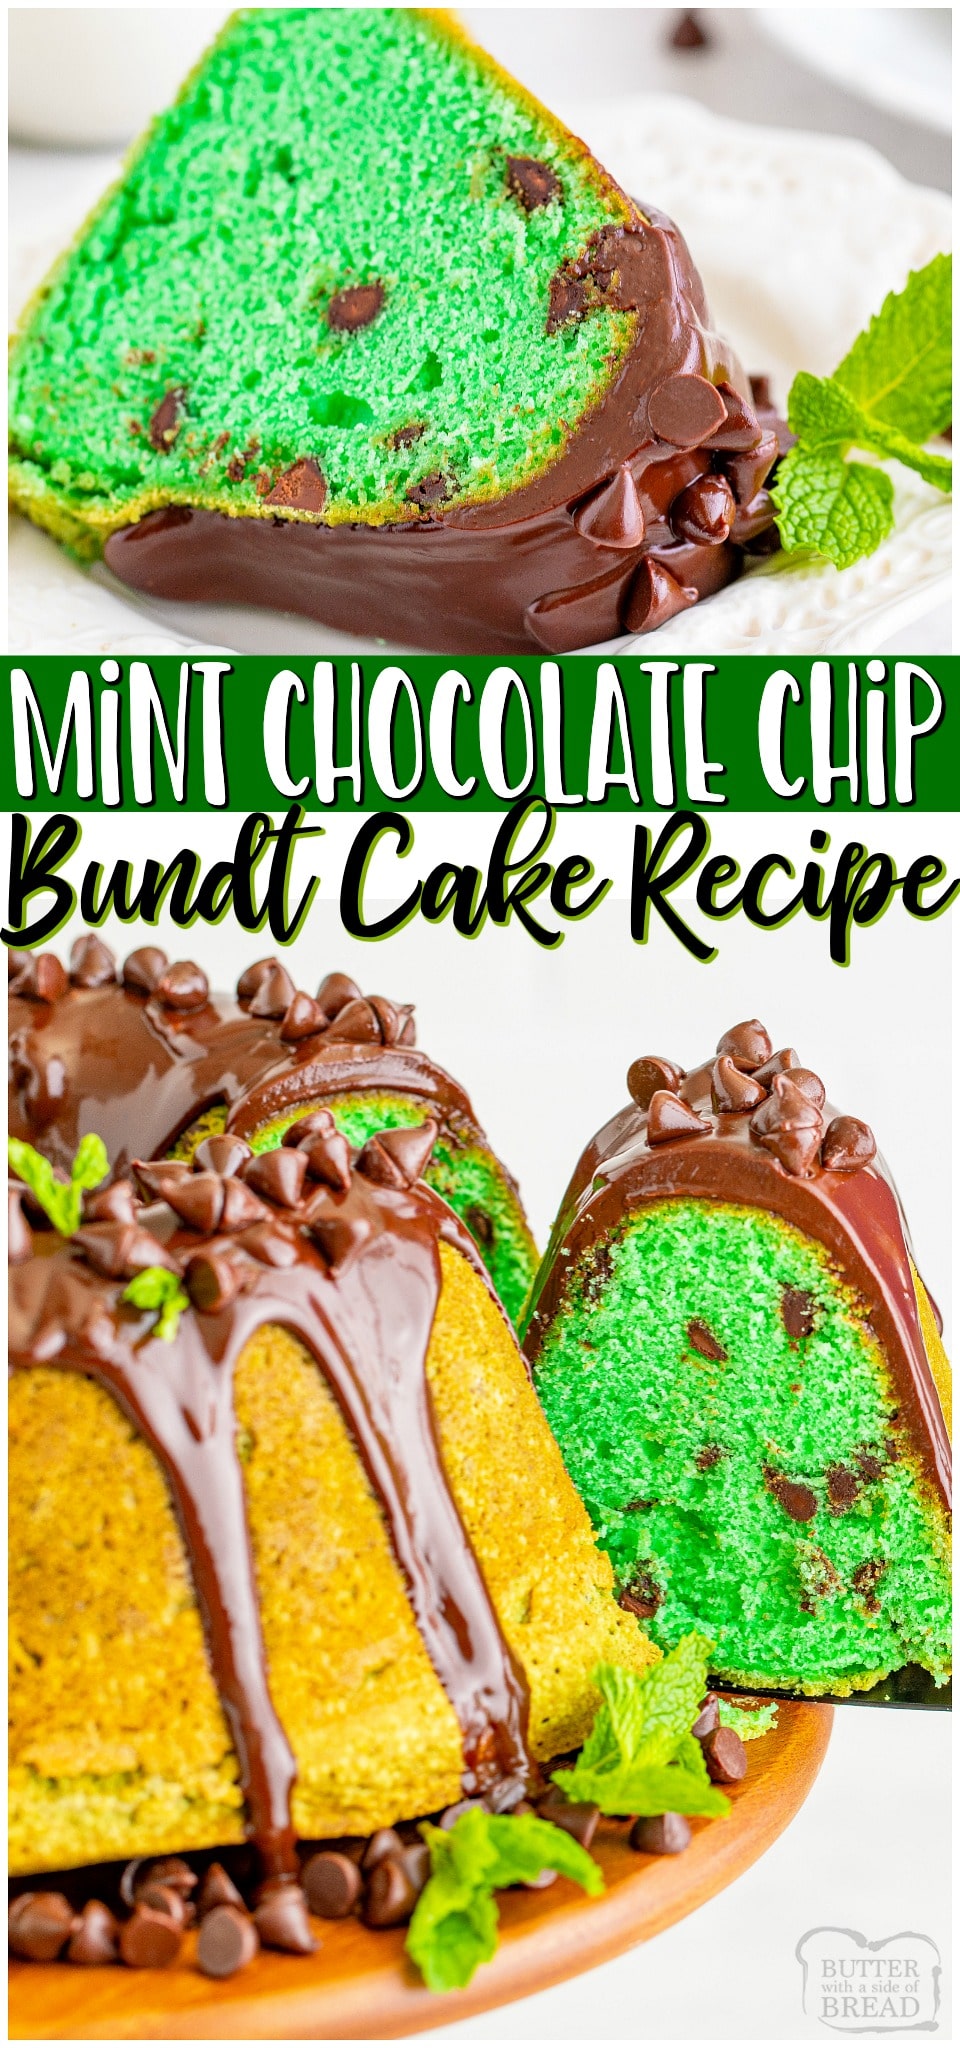 Mint chocolate chip bundt cake made for mint chip lovers! Minty green cake topped with sweet chocolate glaze & chocolate chips for a festive & fun holiday cake recipe. 